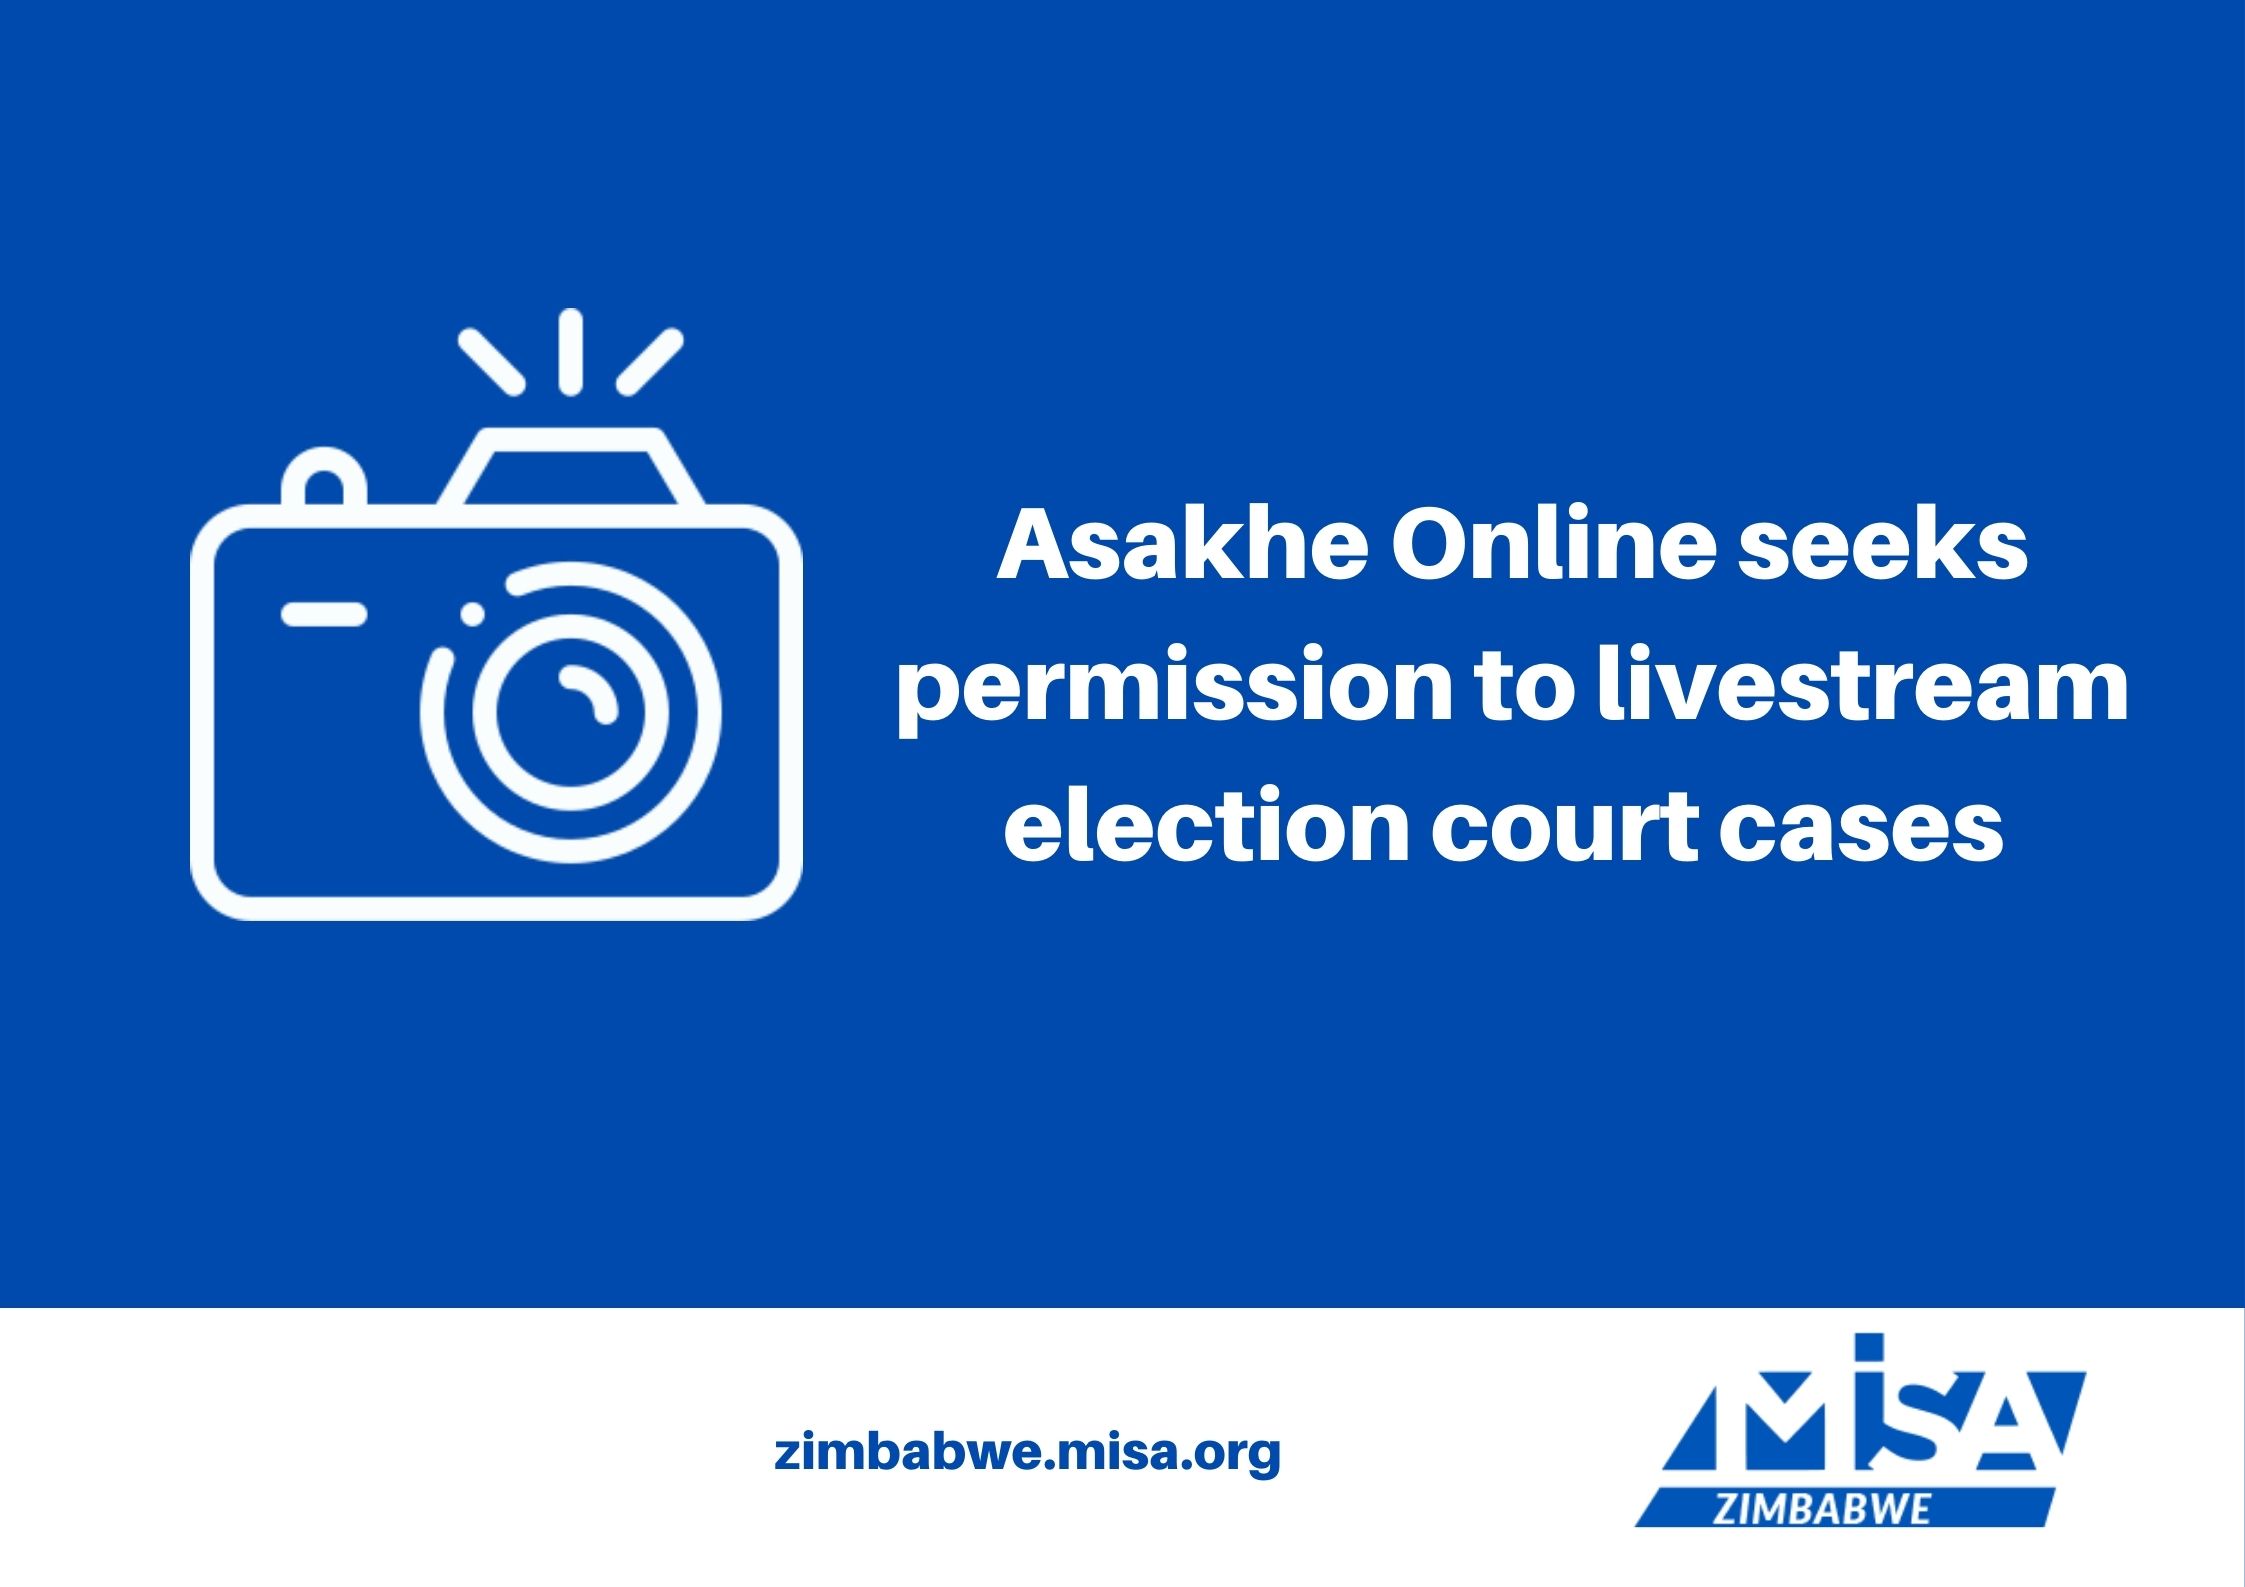 Asakhe Online seeks permission to livestream election court cases